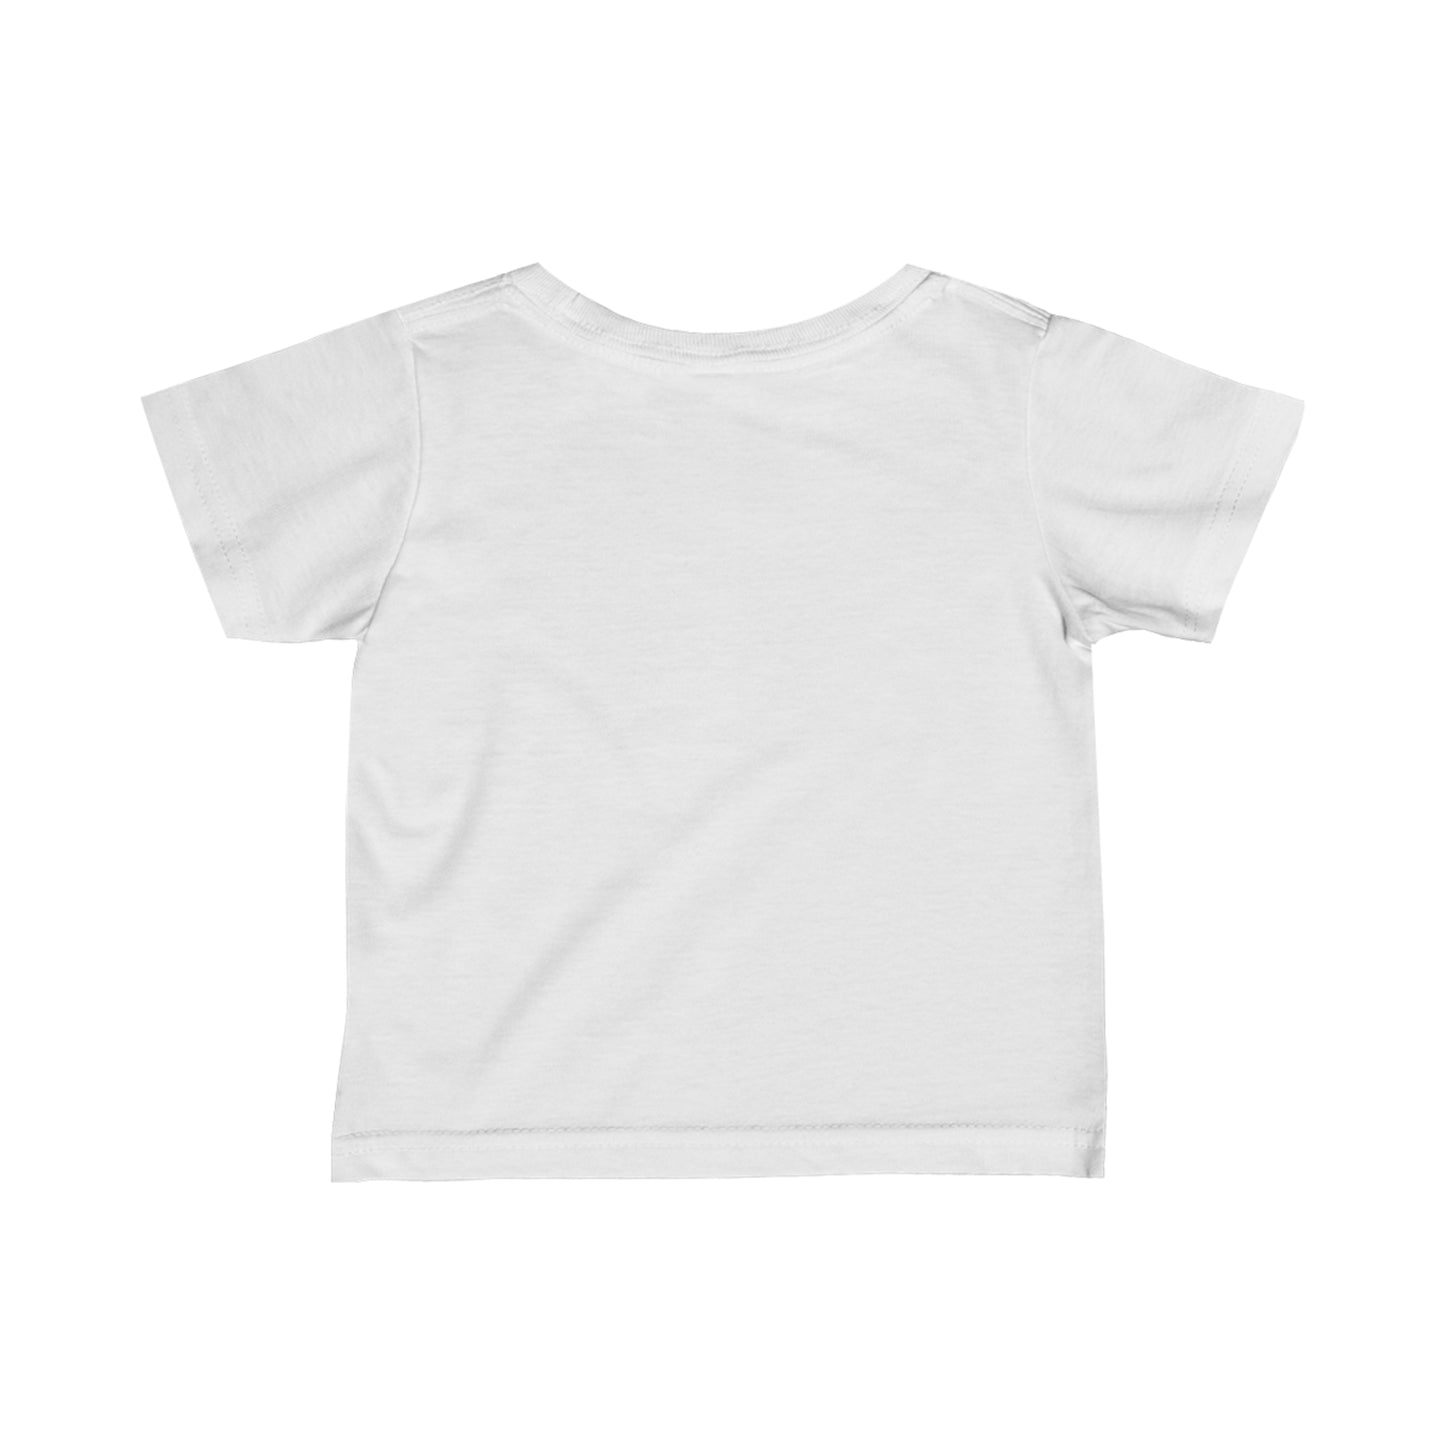 I'm Not Lazy. I'm Just Very Relaxed.  Infant Fine Jersey Tee